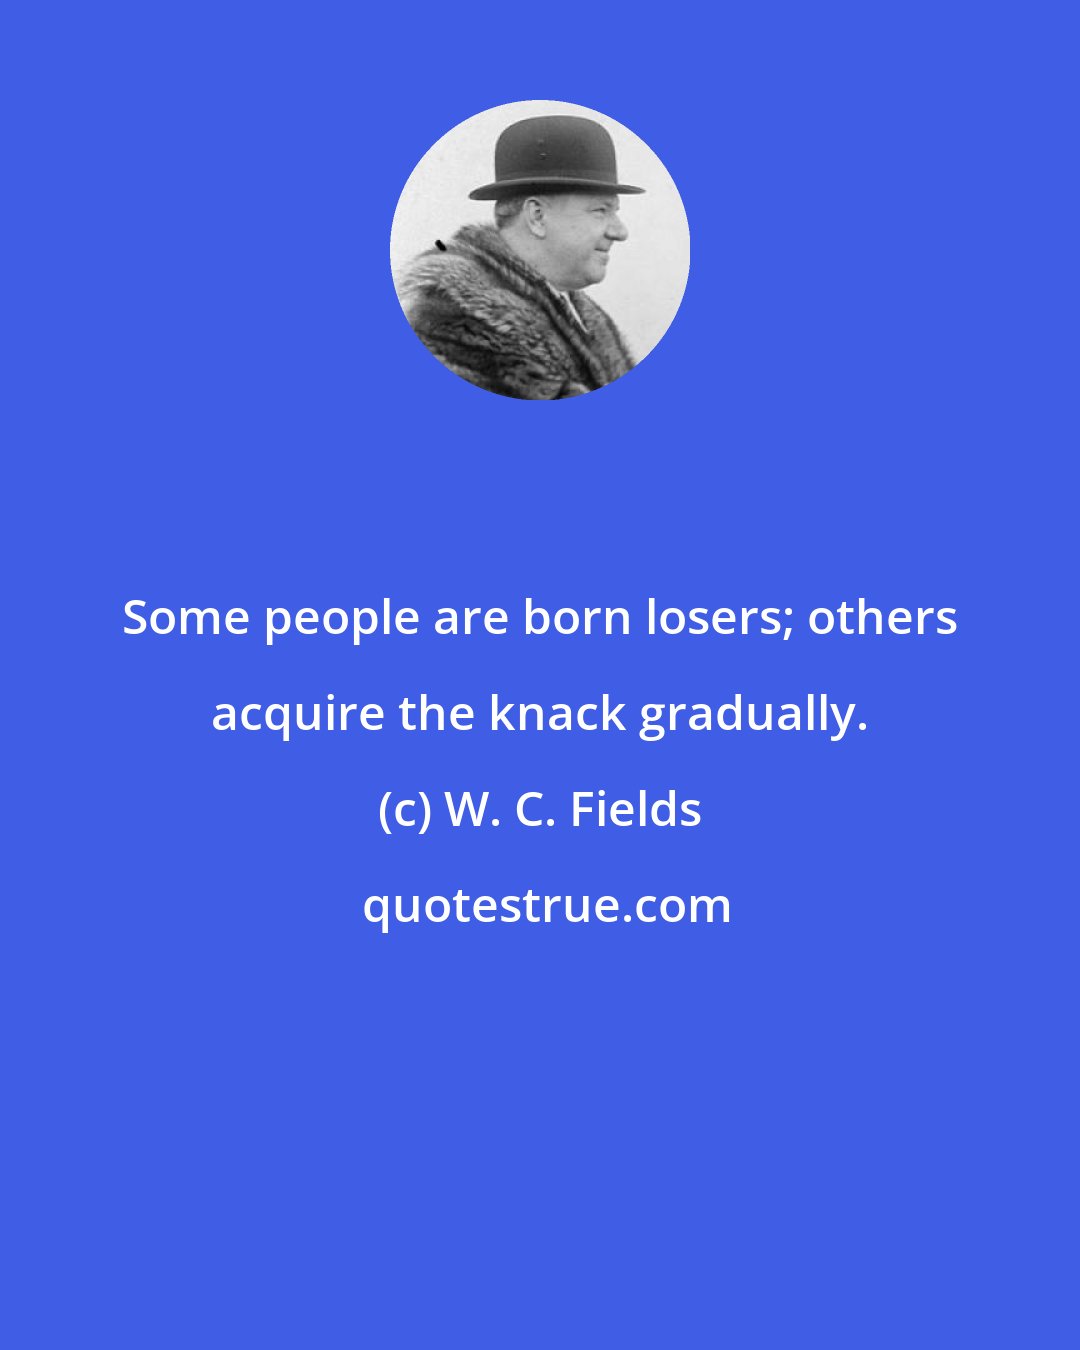 W. C. Fields: Some people are born losers; others acquire the knack gradually.